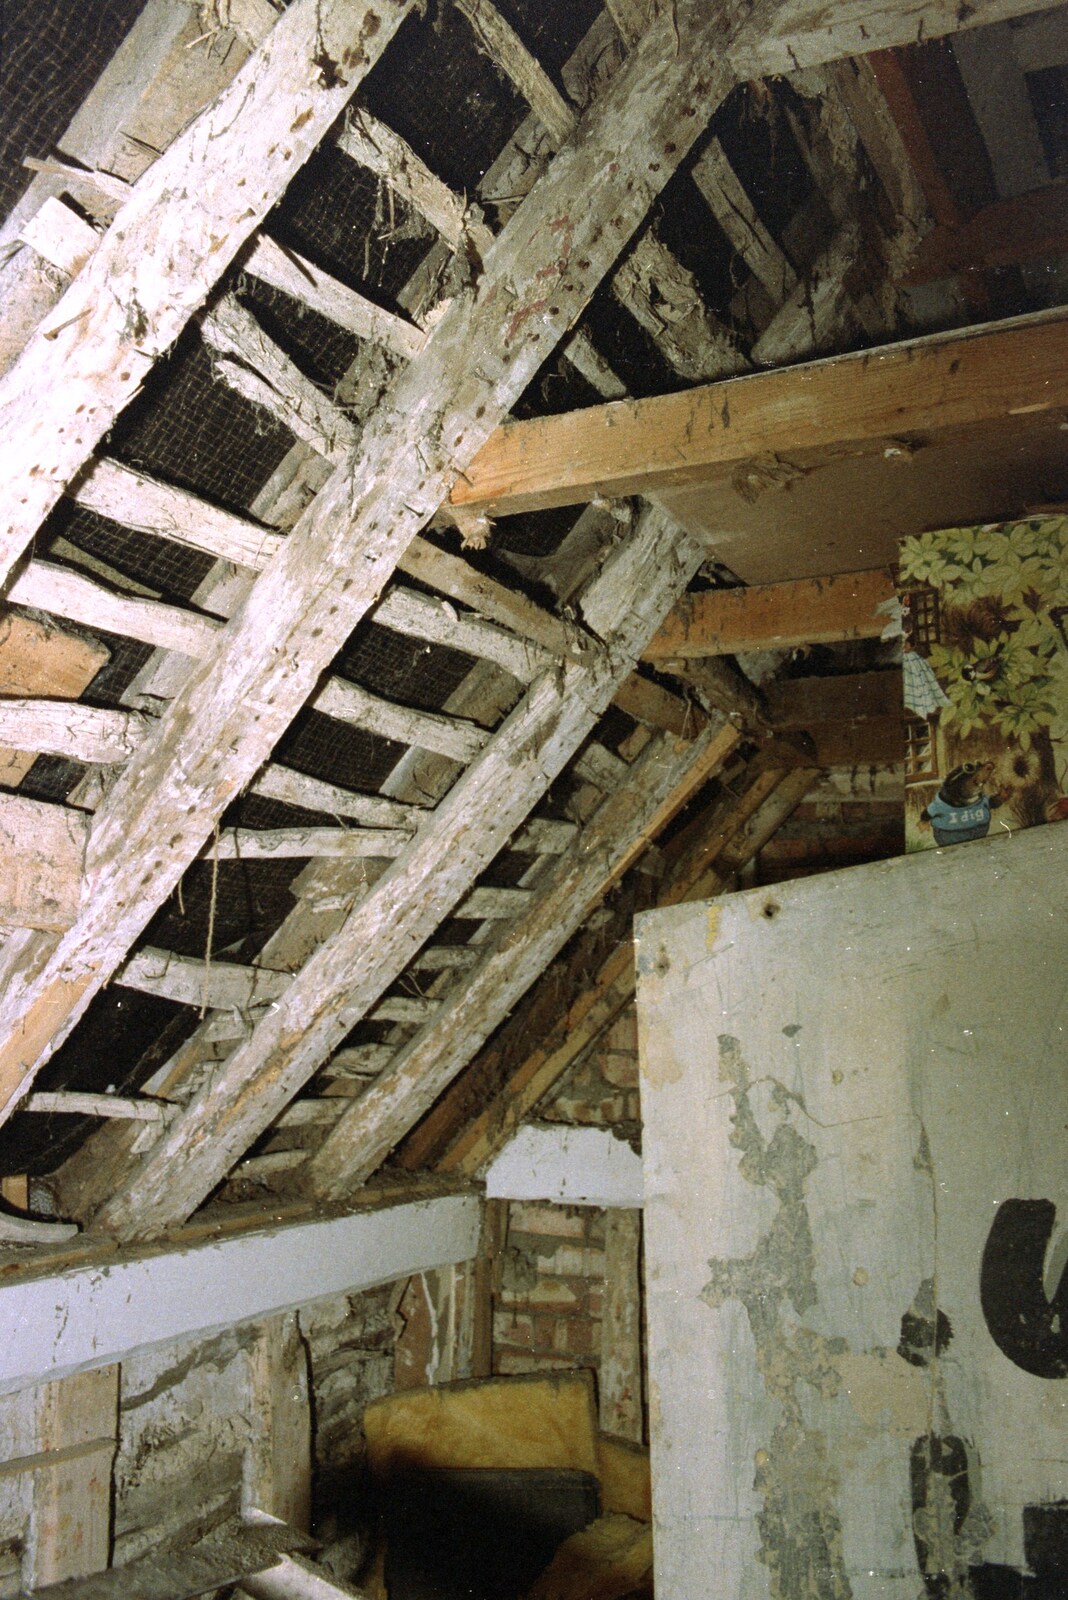 More wreckage from Hale-Bopp and Bedroom Demolition, Brome, Suffolk - 10th May 1997